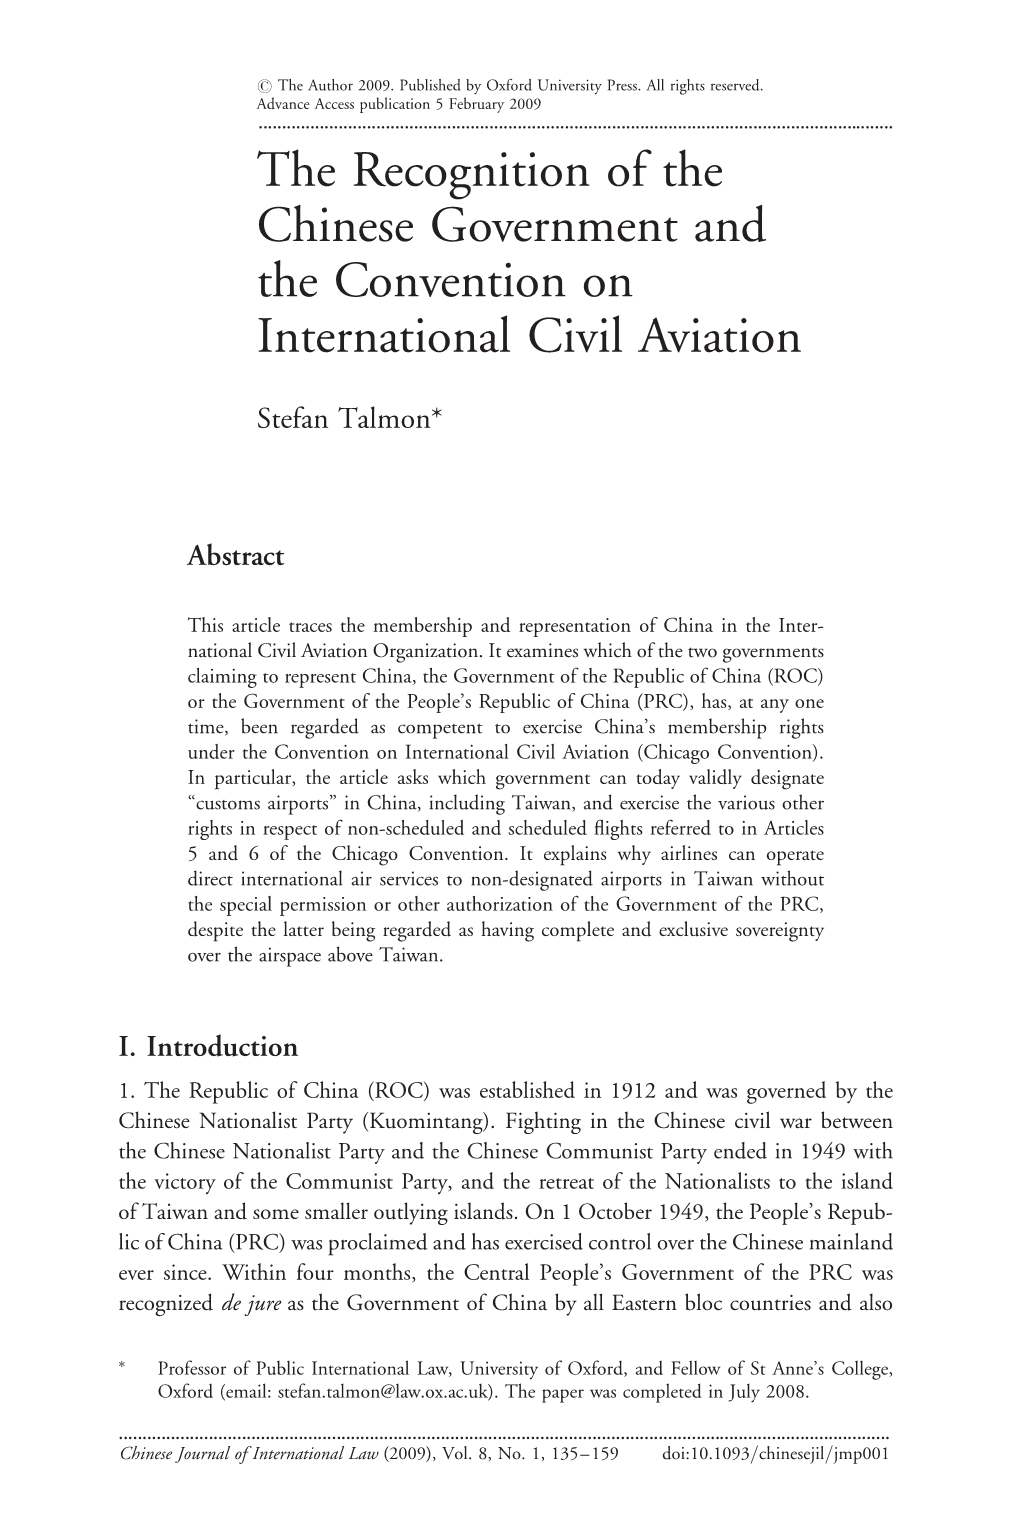 The Recognition of the Chinese Government and the Convention on International Civil Aviation